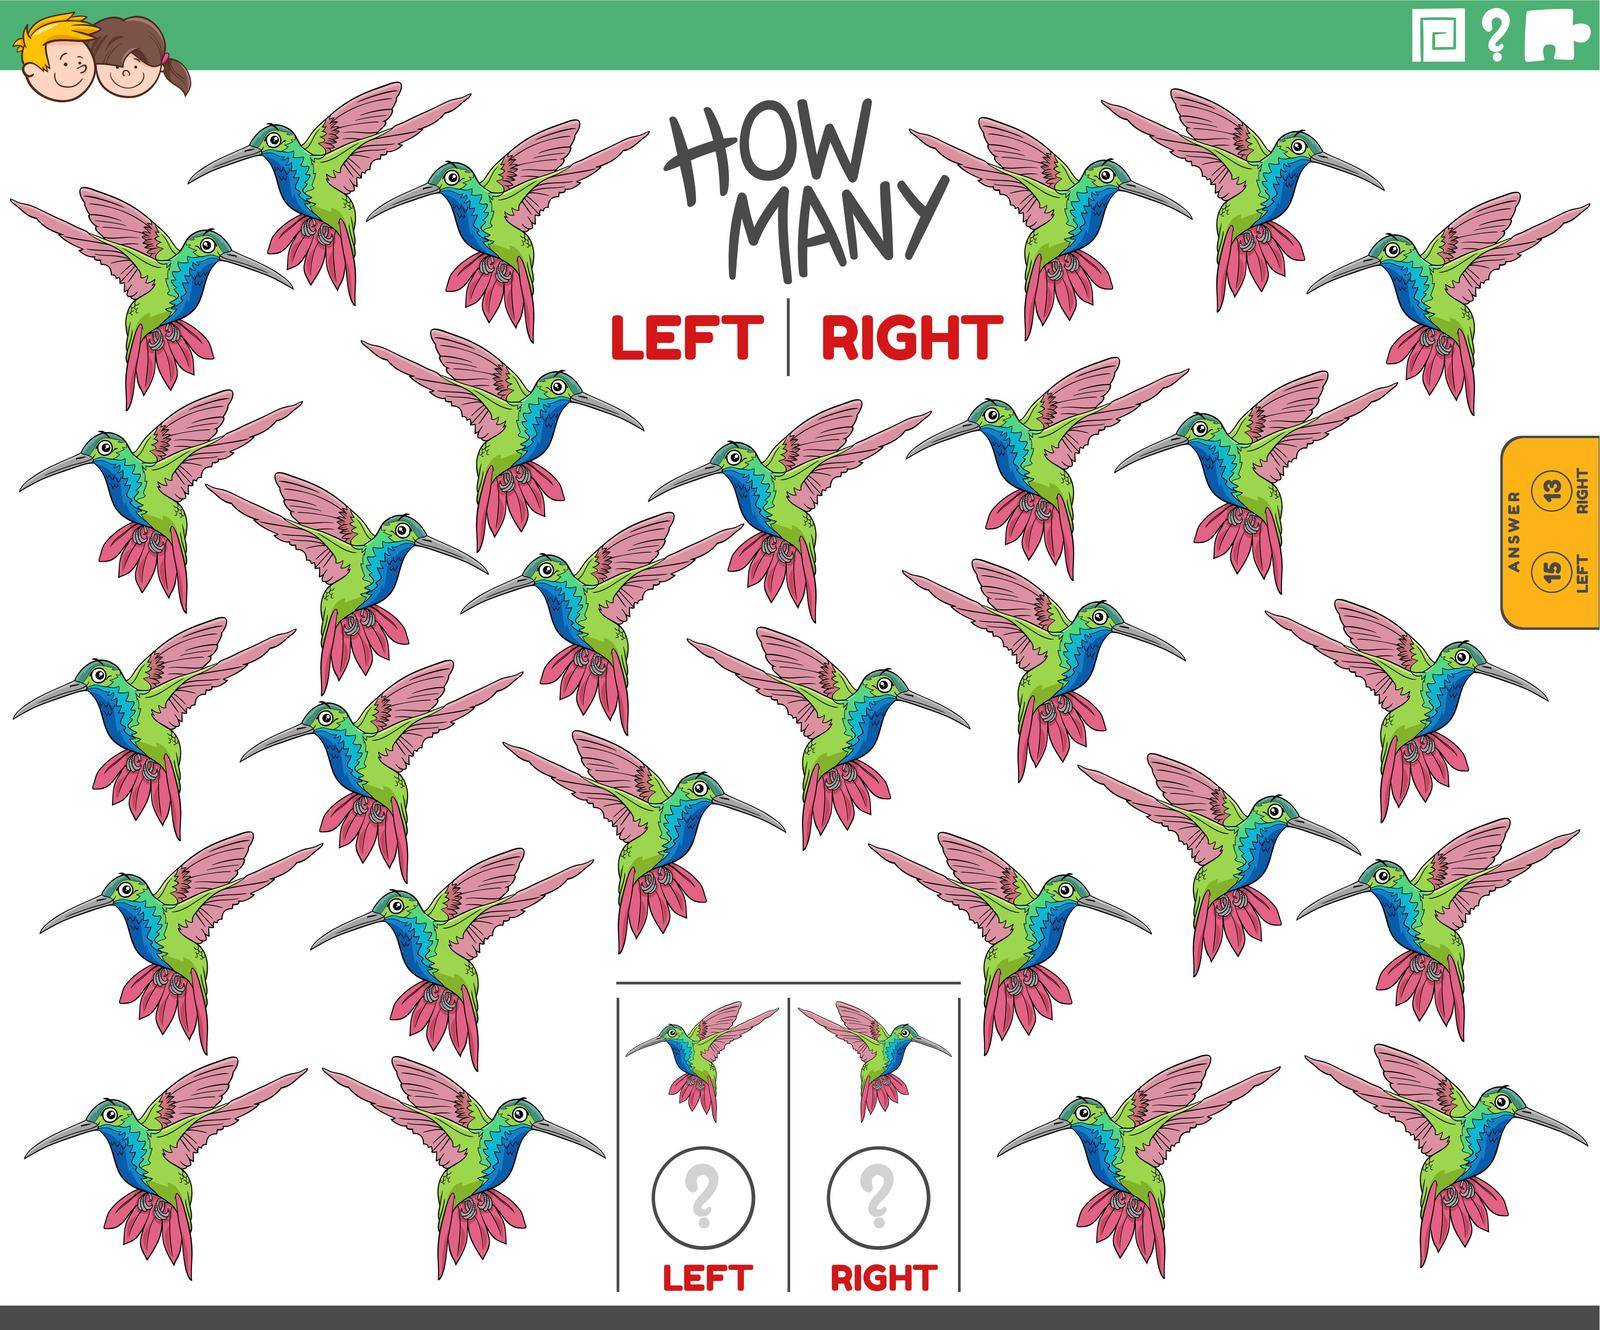 counting left and right pictures of cartoon hummingbird by izakowski